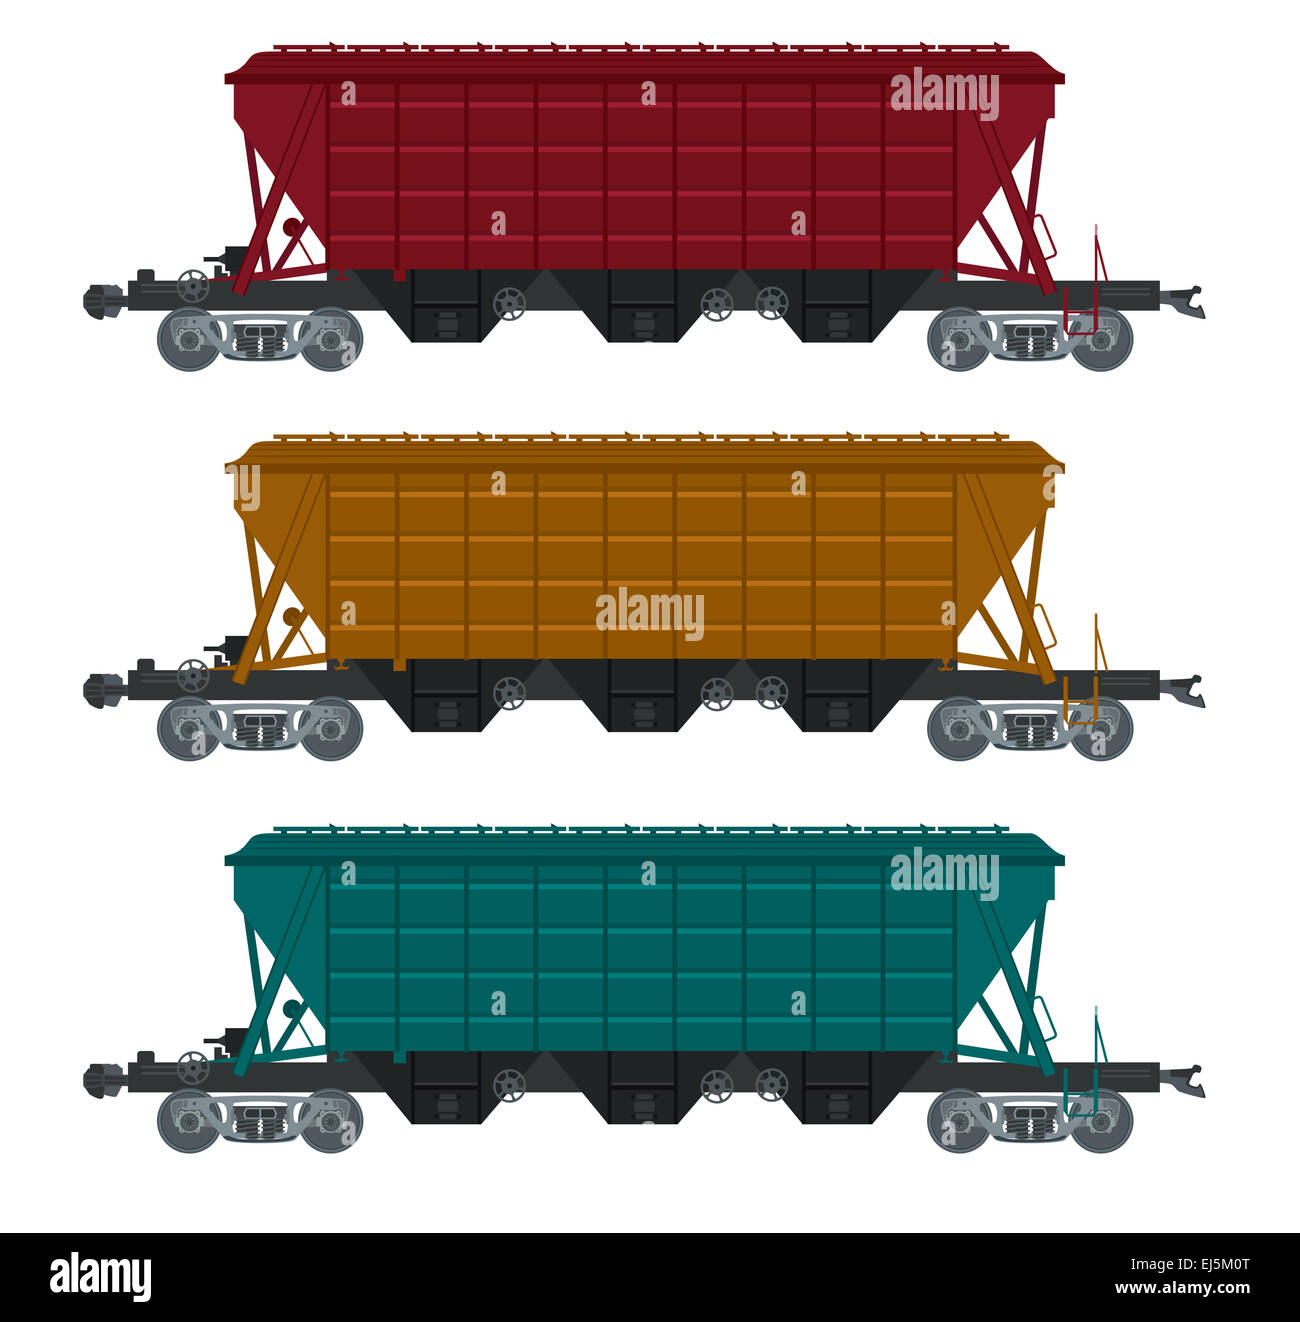 Vector image of collection of freight car Stock Photo